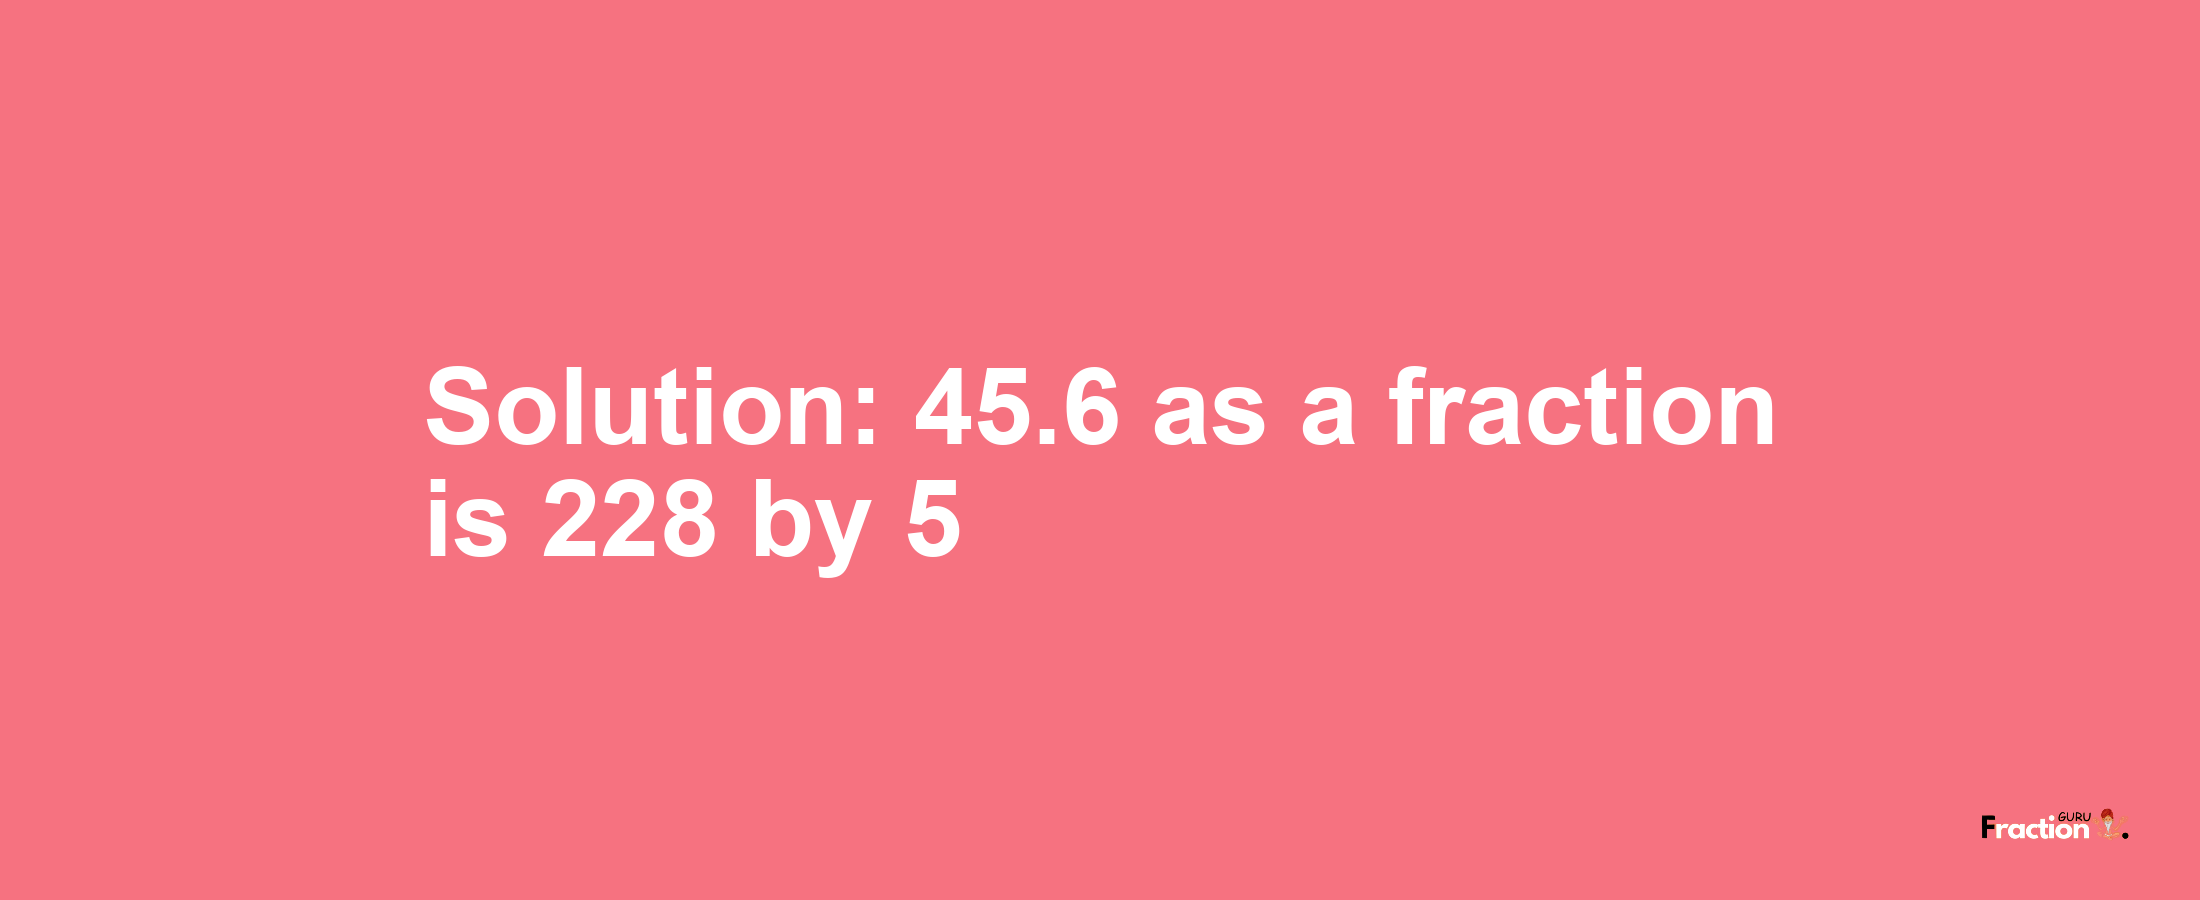 Solution:45.6 as a fraction is 228/5